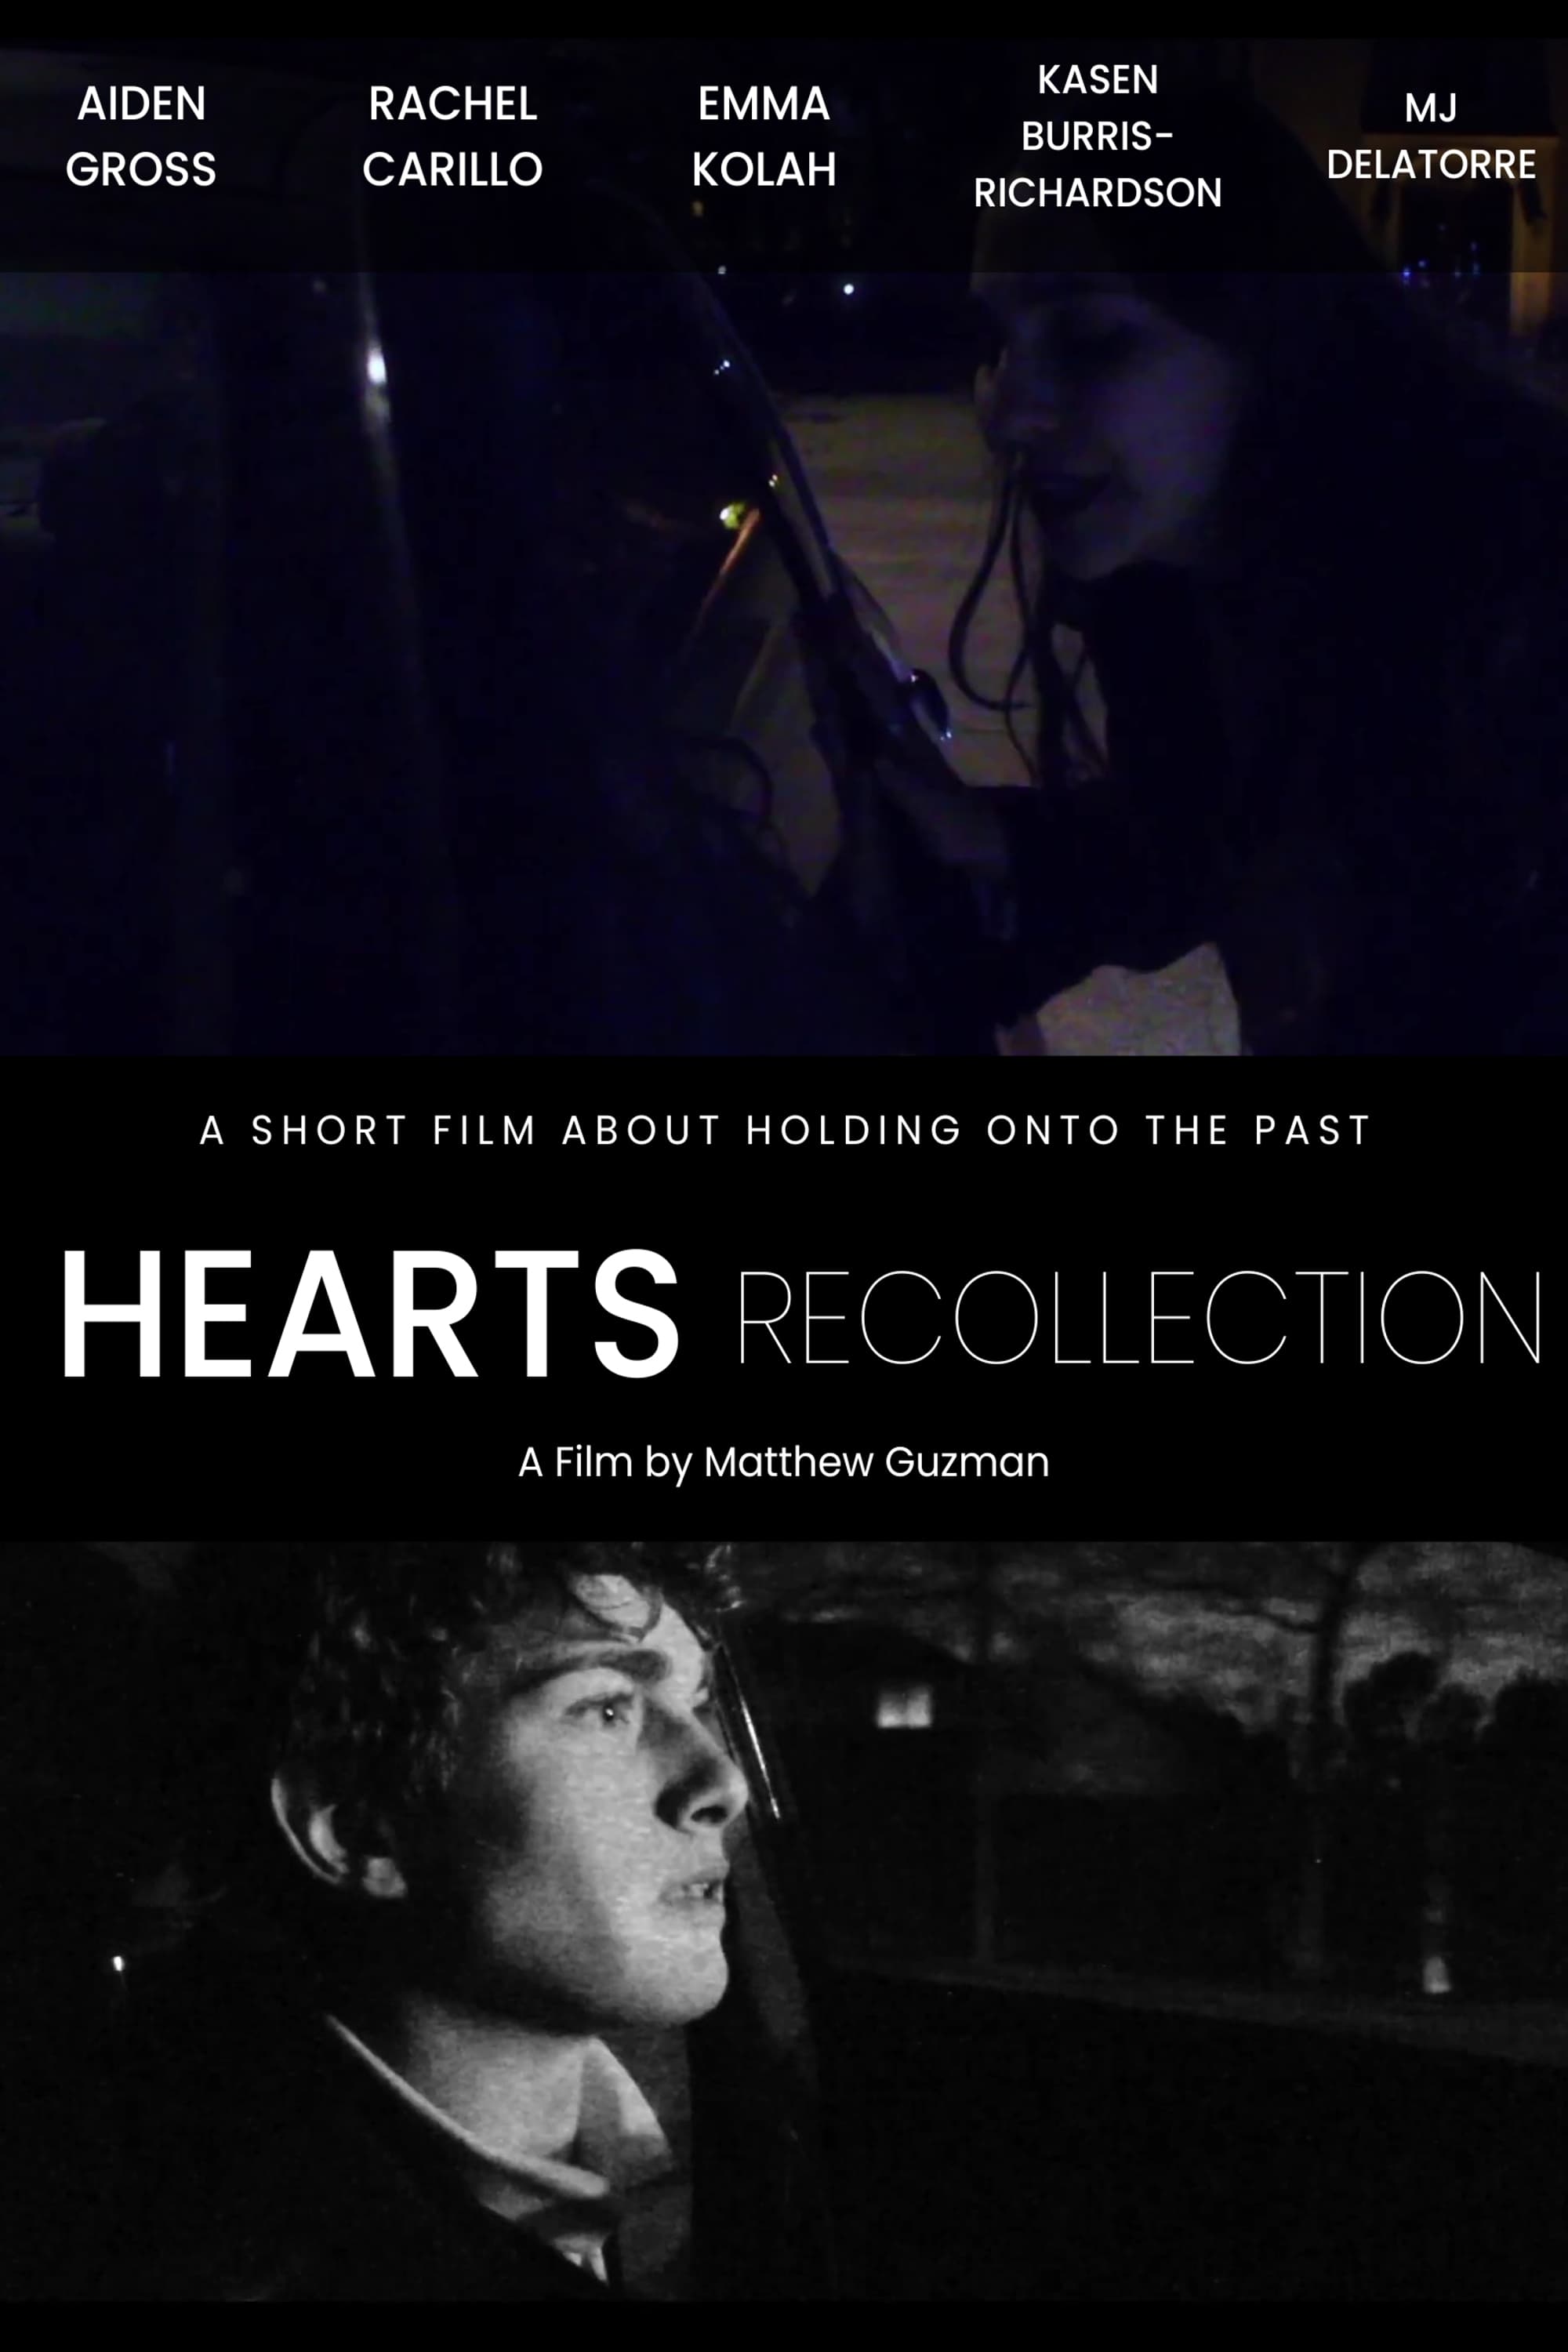 Hearts Recollection - Short Film